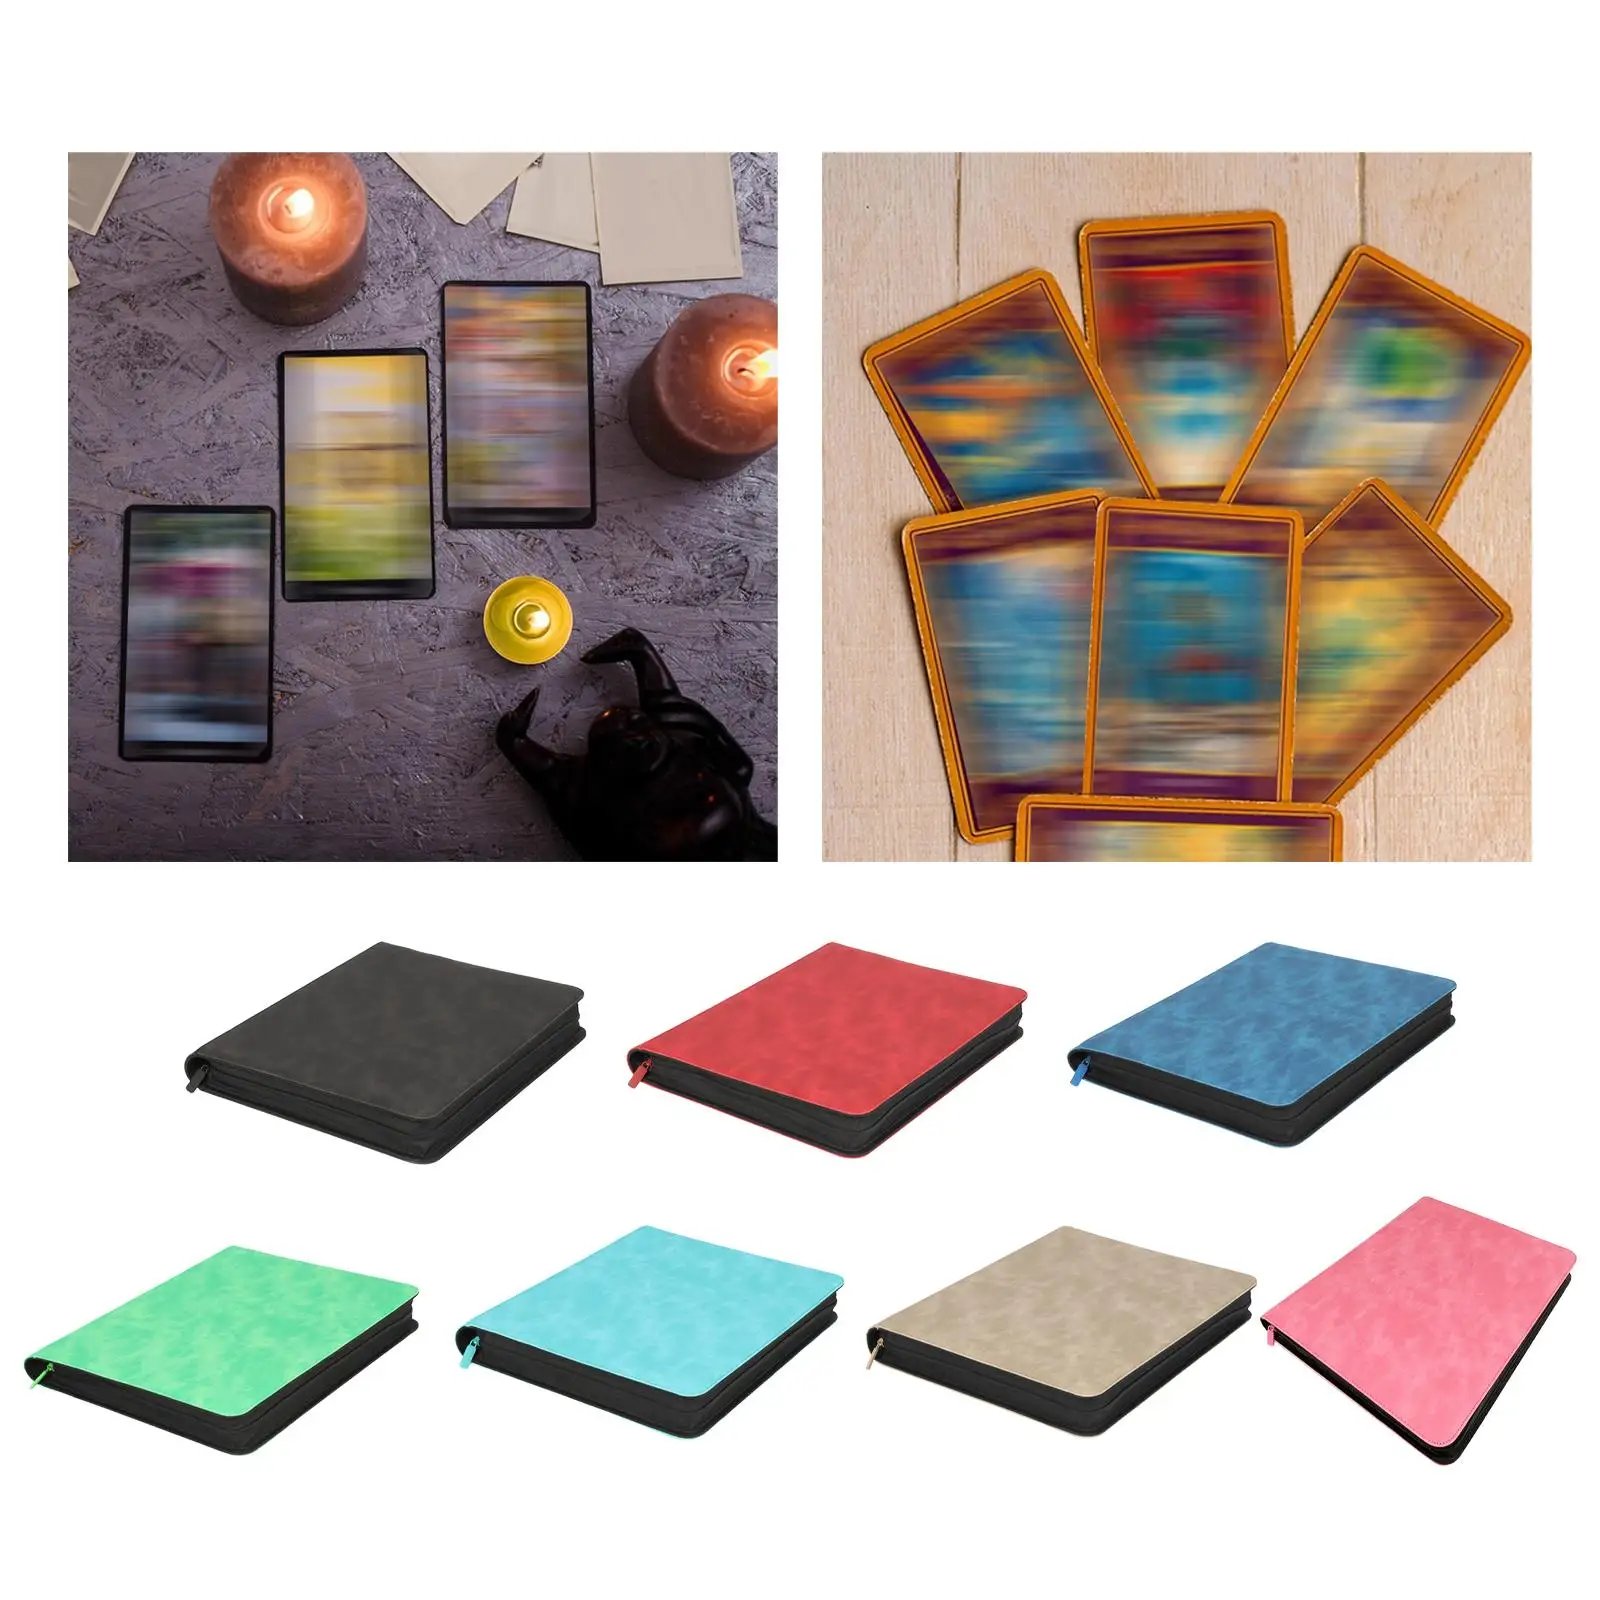 Card Binder 216 Cards with Zipper Large Capacity Card Storage Binder Cards Album for Trading Cards Gaming Cards Football Cards